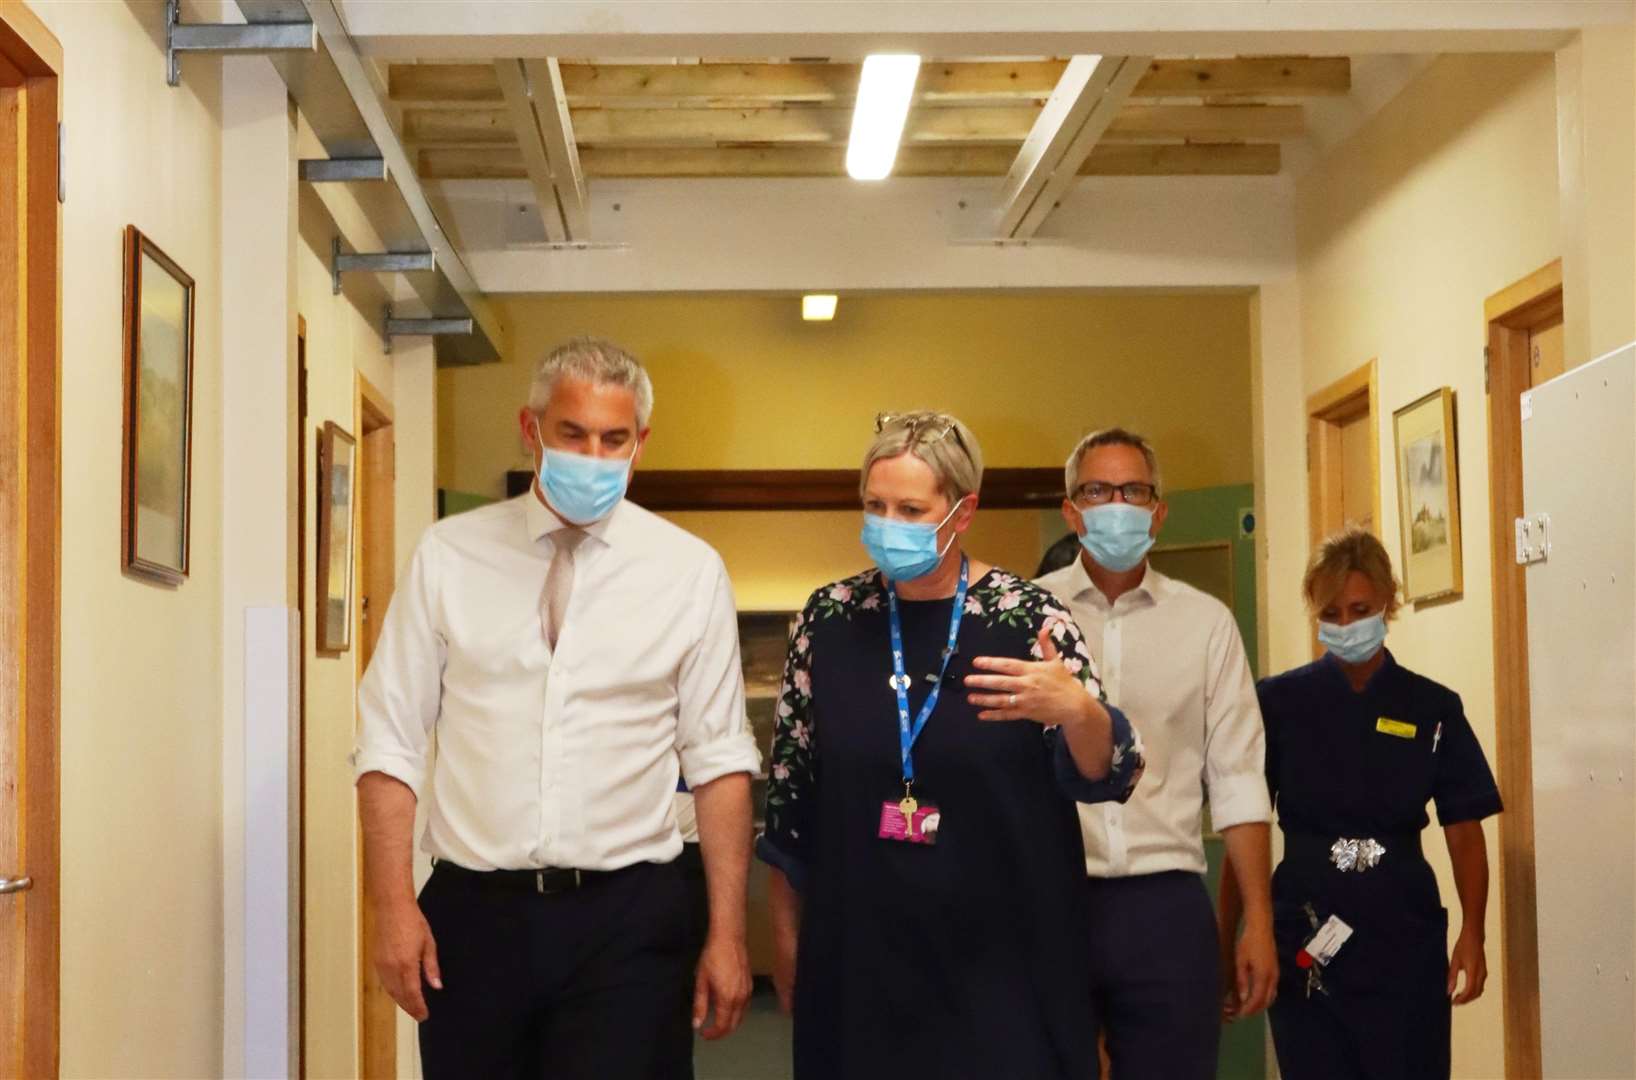 Steve Barclay with Laura Skaife-Knight on a visit to the Queen Elizabeth Hospital. Picture: Dave Fincham/QEH